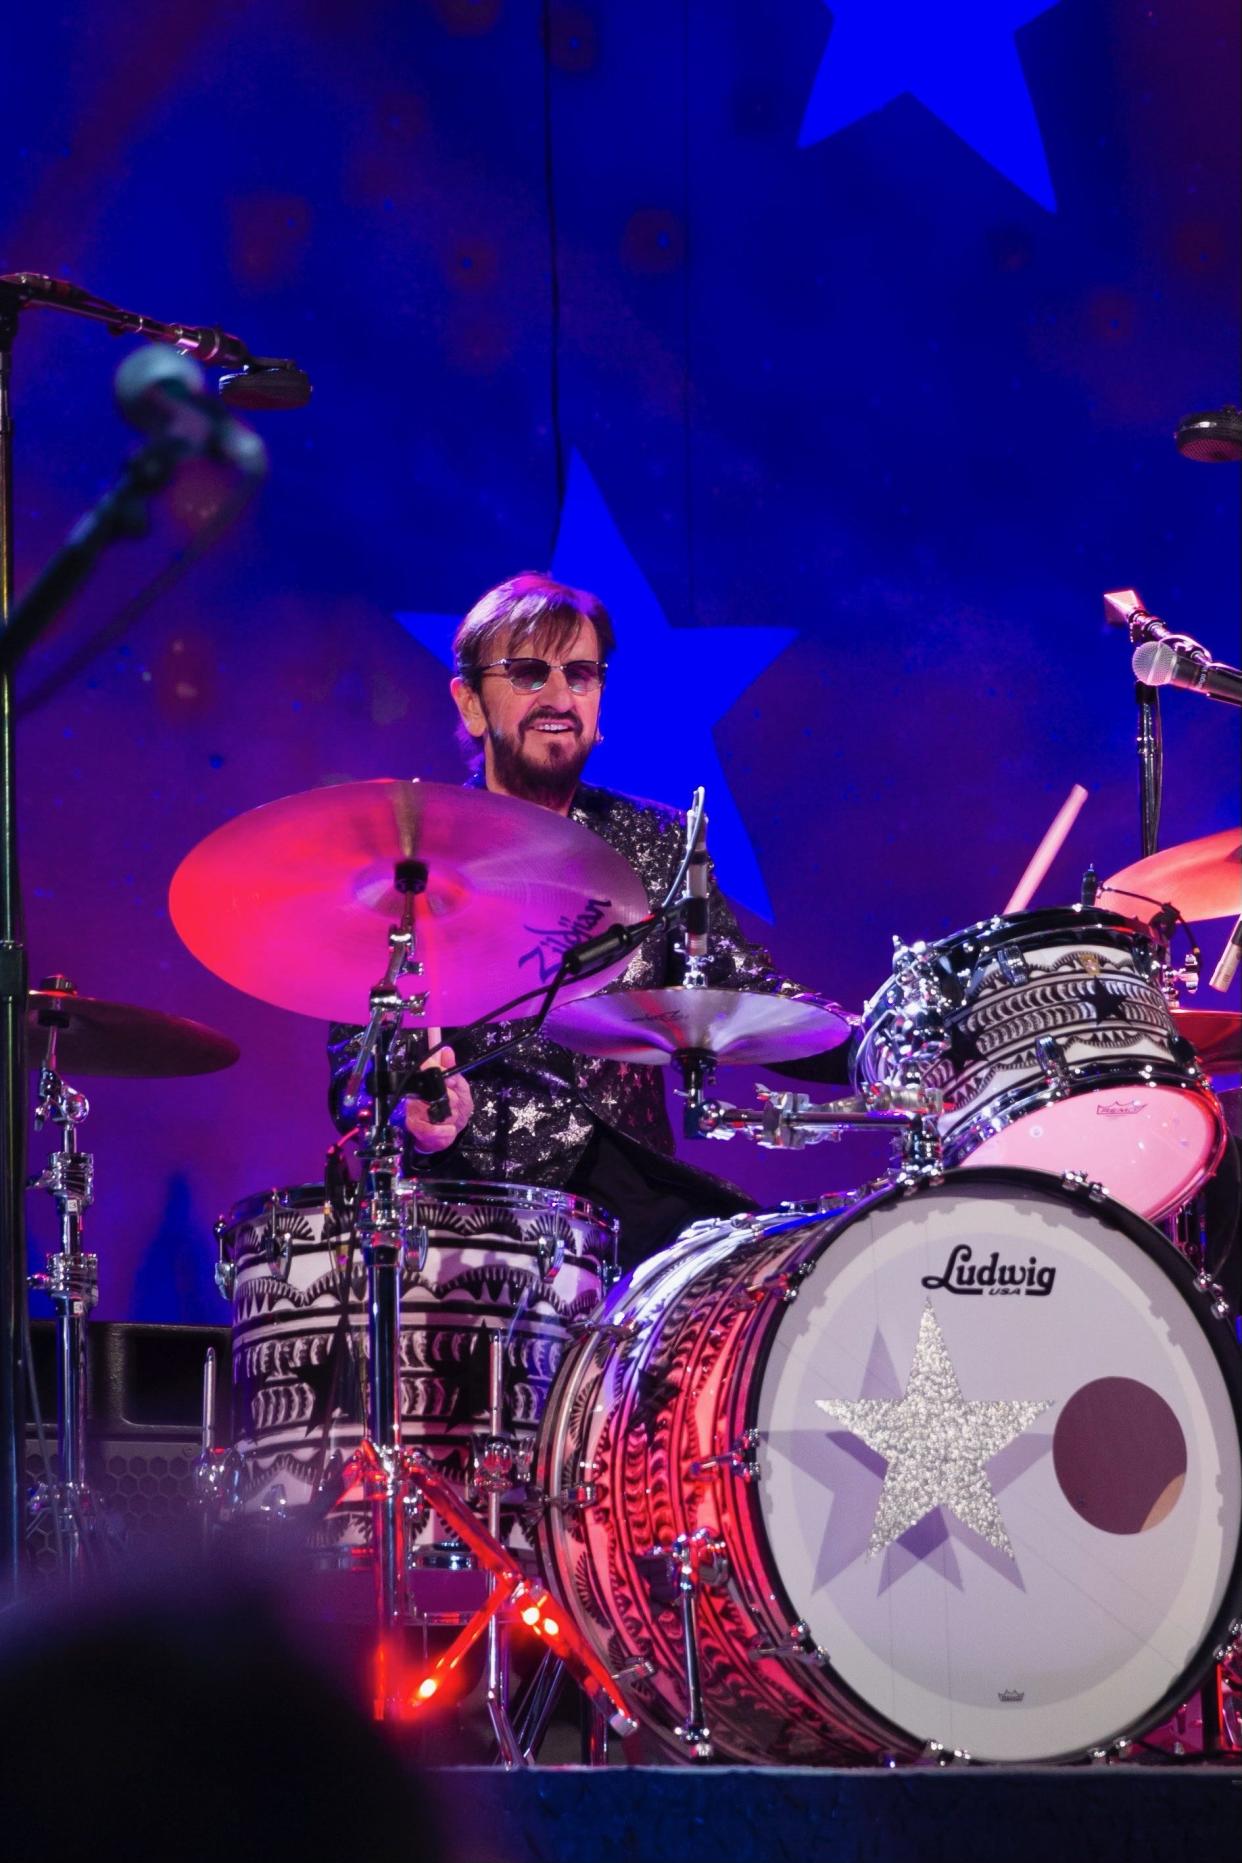 Ringo Starr says he rarely plays his drums unless he's recording, rehearsing or playing live with the All-Starr Band.